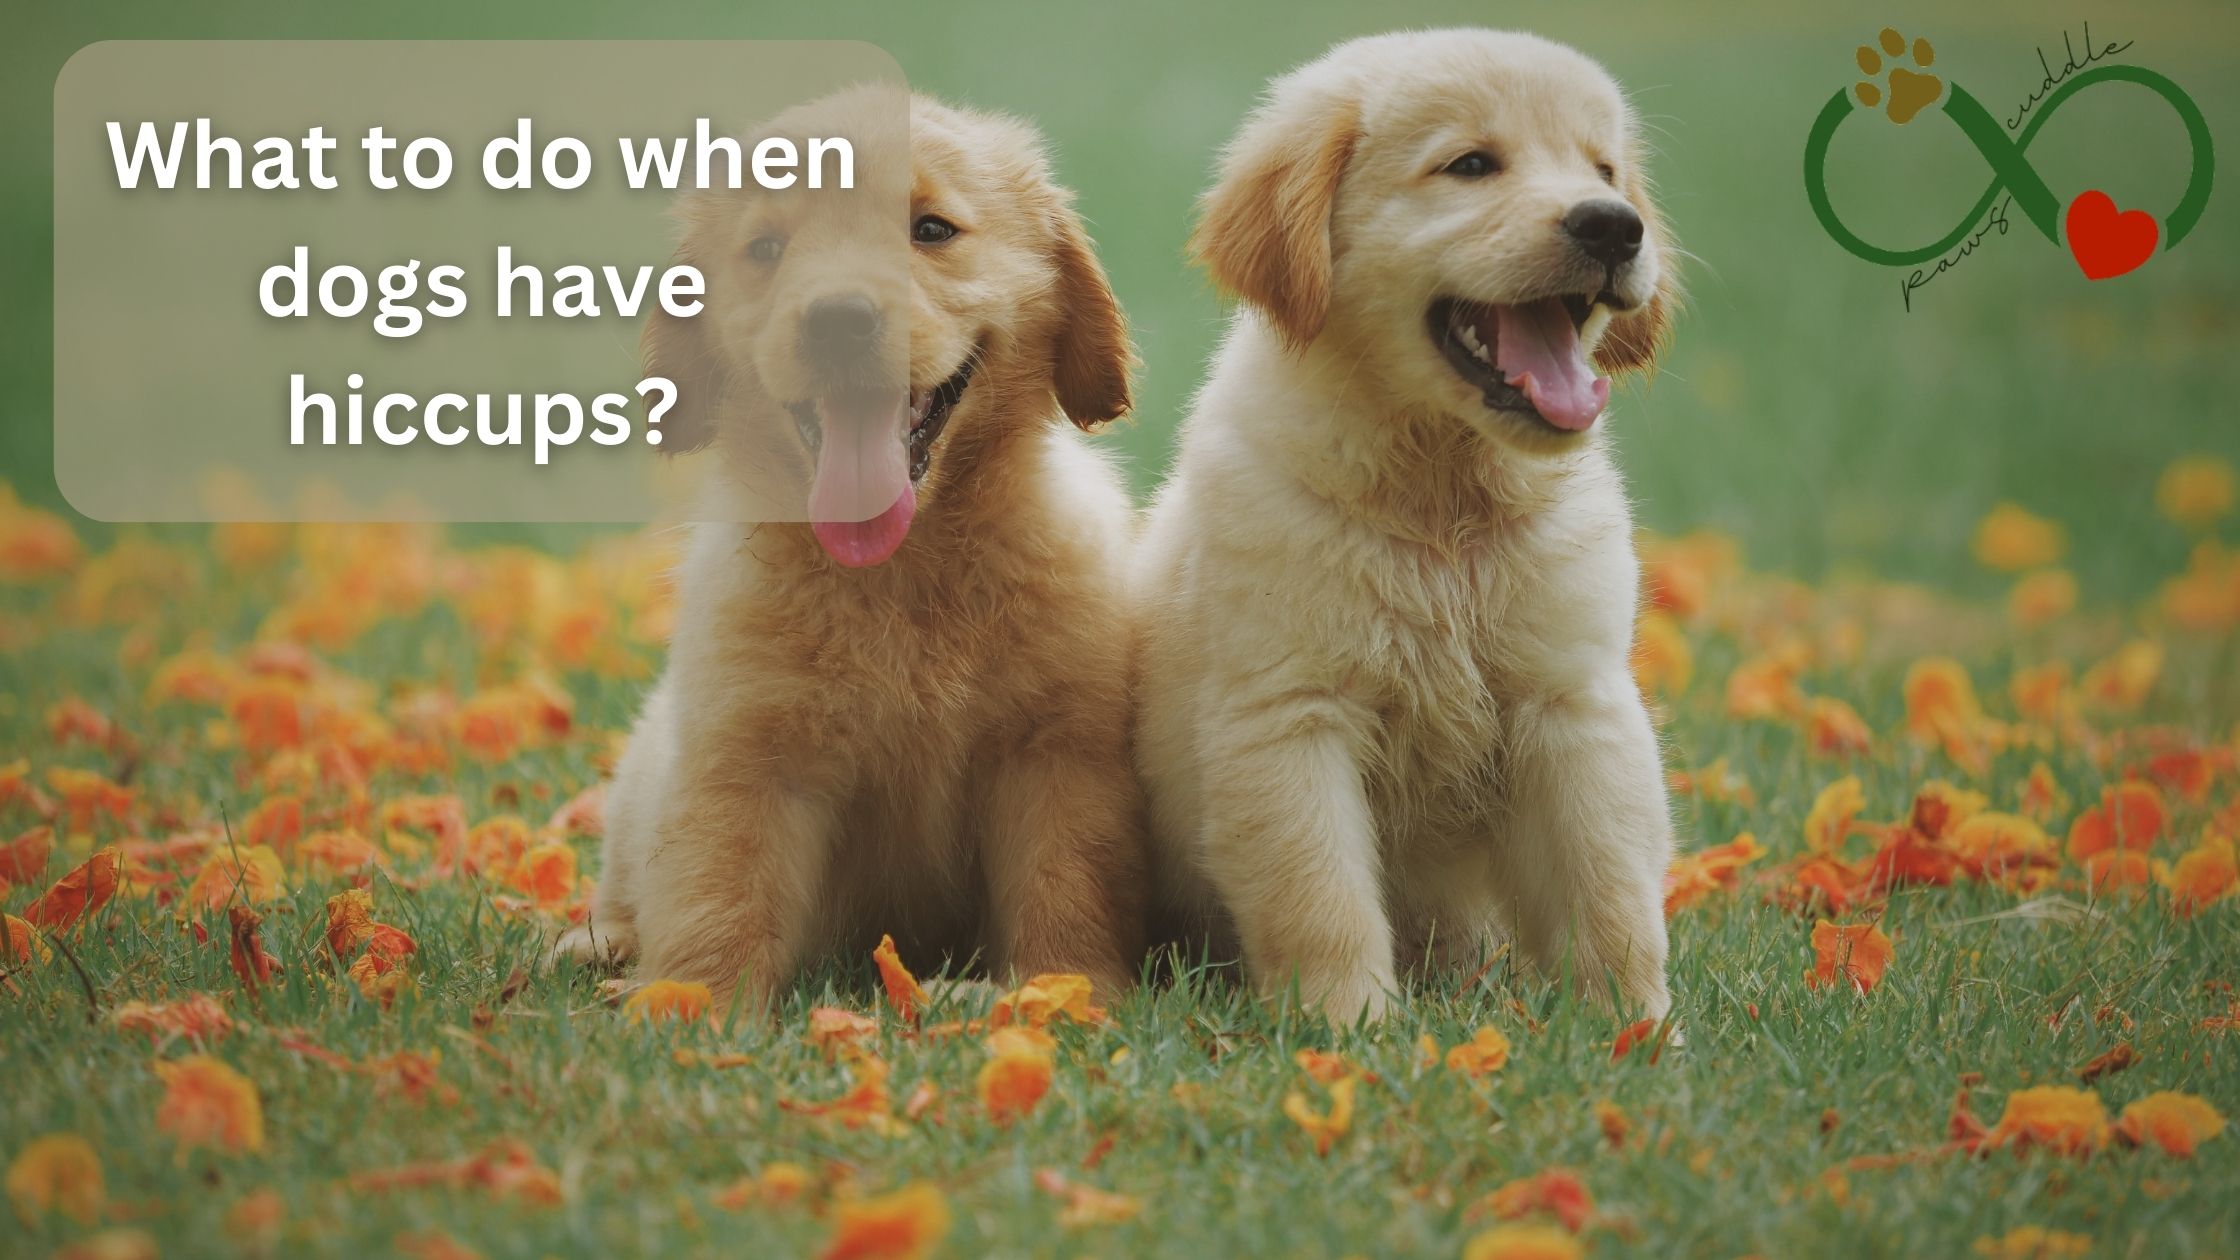 What to do when dogs have hiccups?